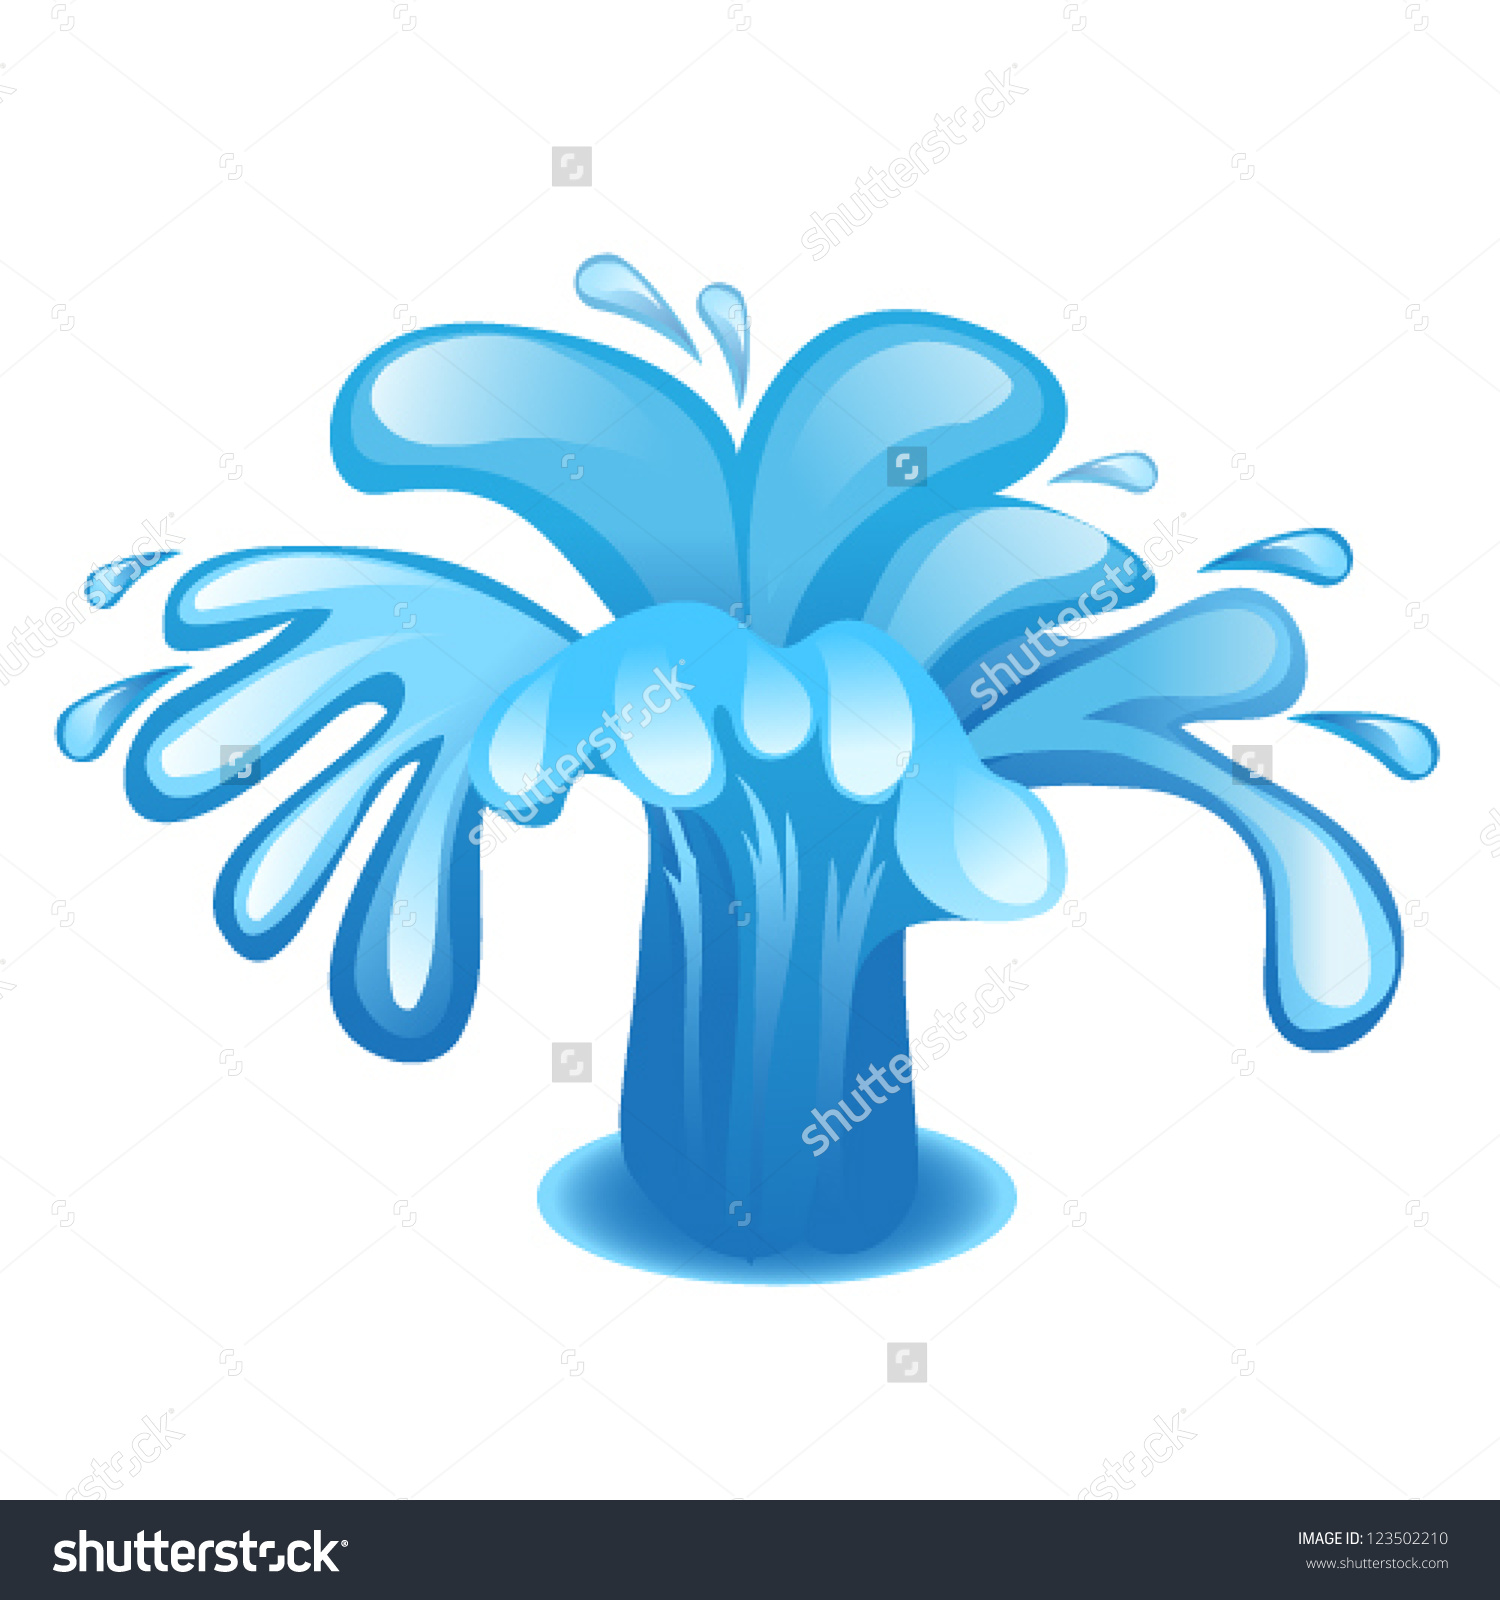 Hd images of fountains with water spouting out clipart.